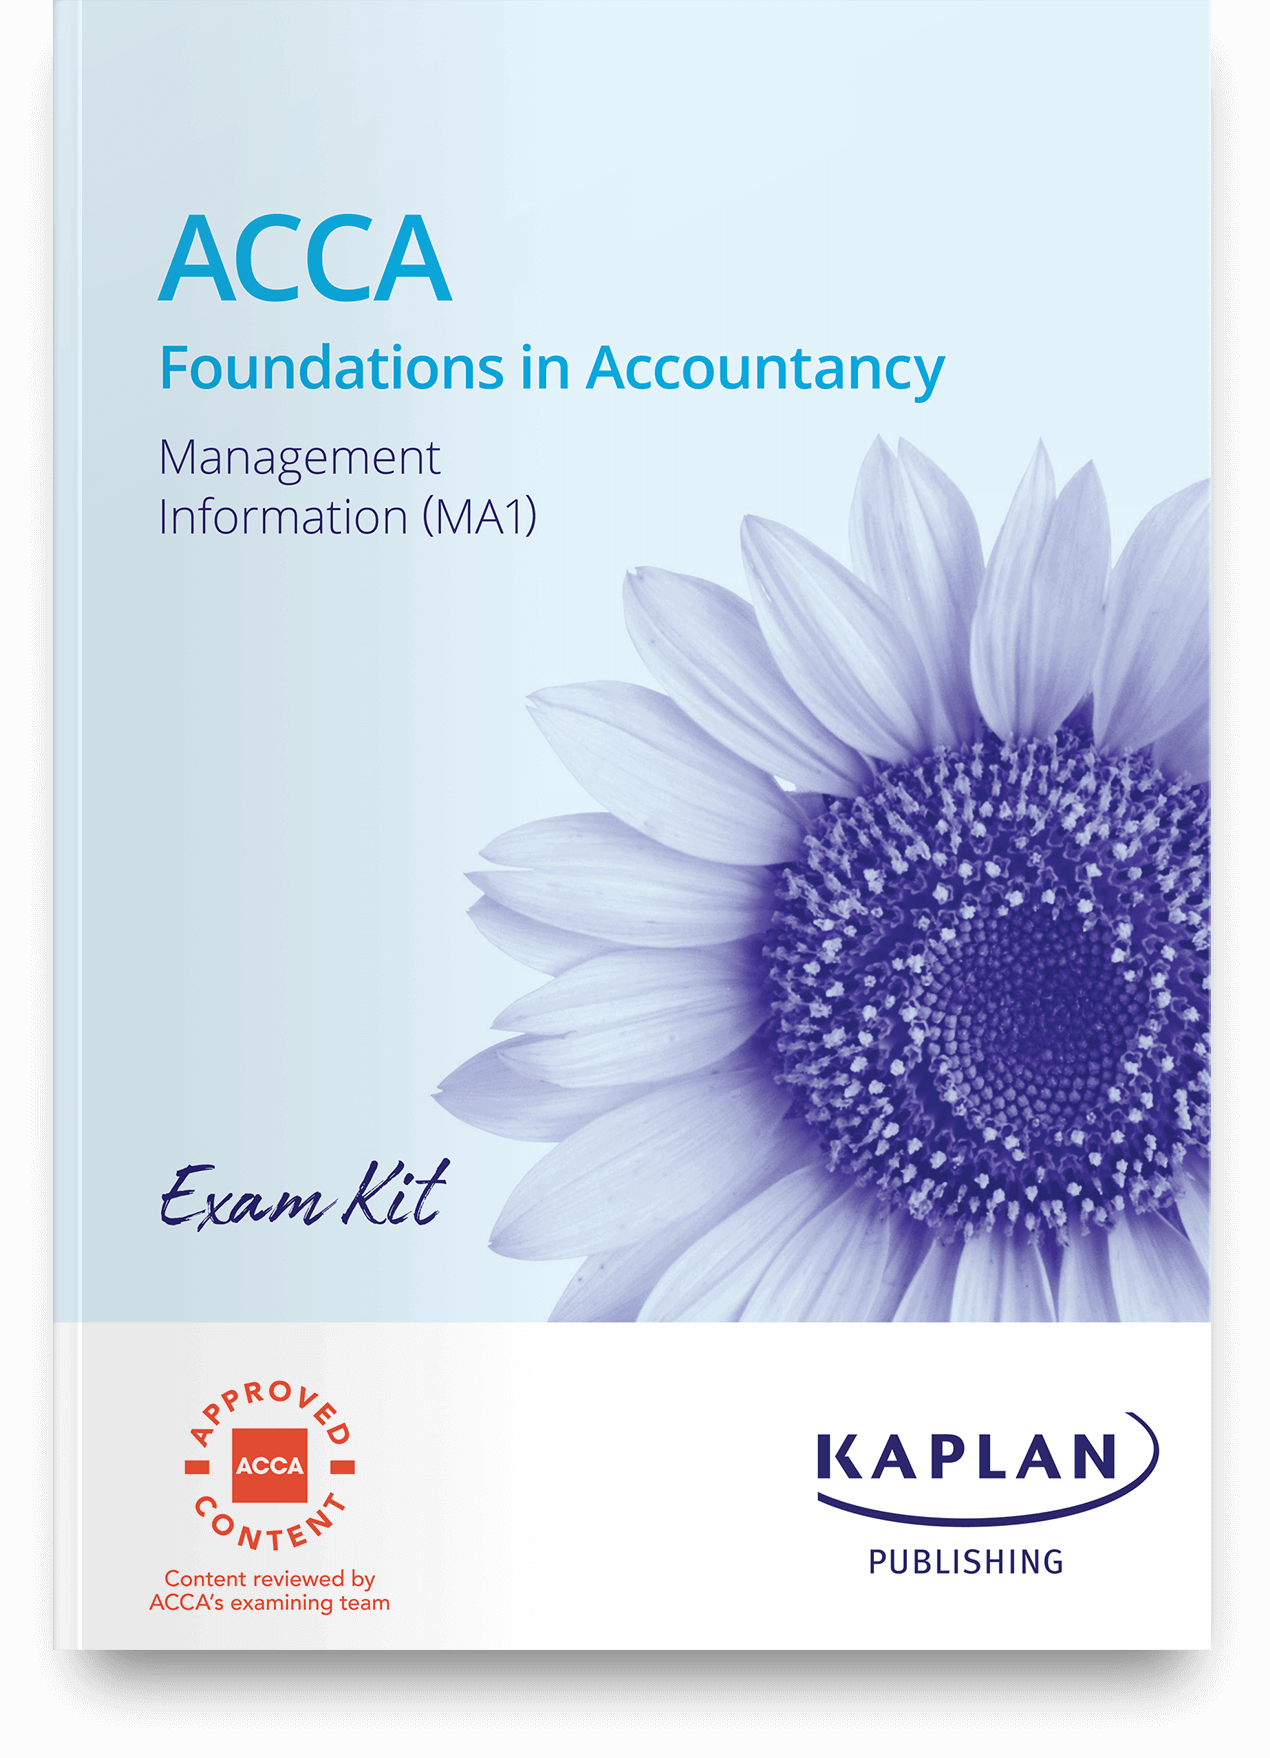 An image of the book for ACCA Foundations - Management Information (MA1) - Exam Kit